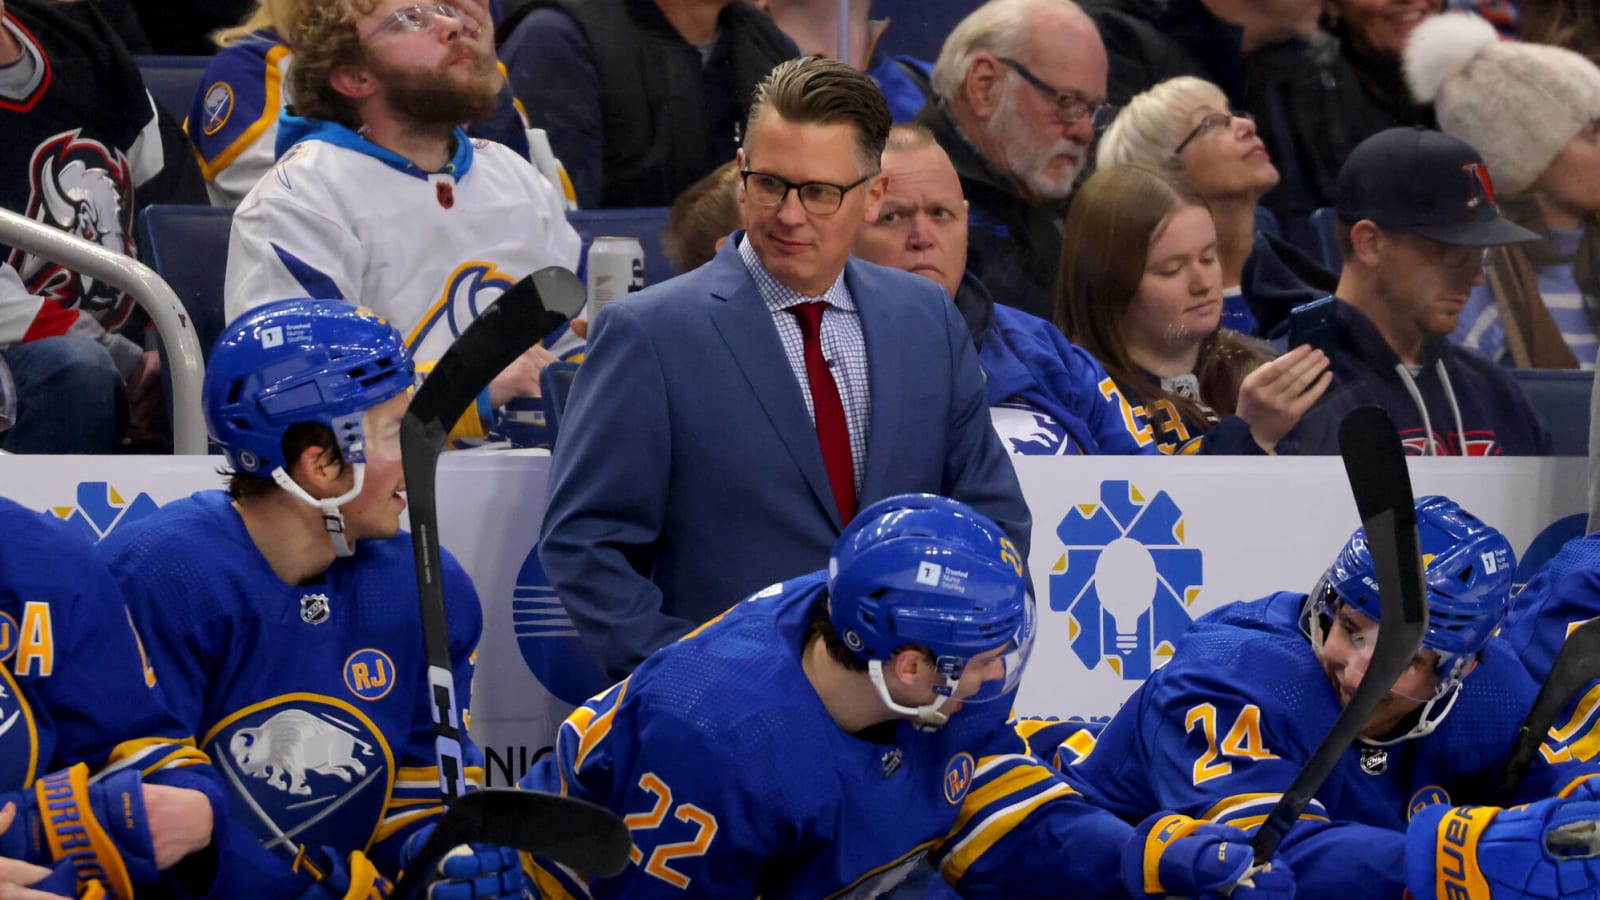 Seth Appert promoted to Sabres assistant coach